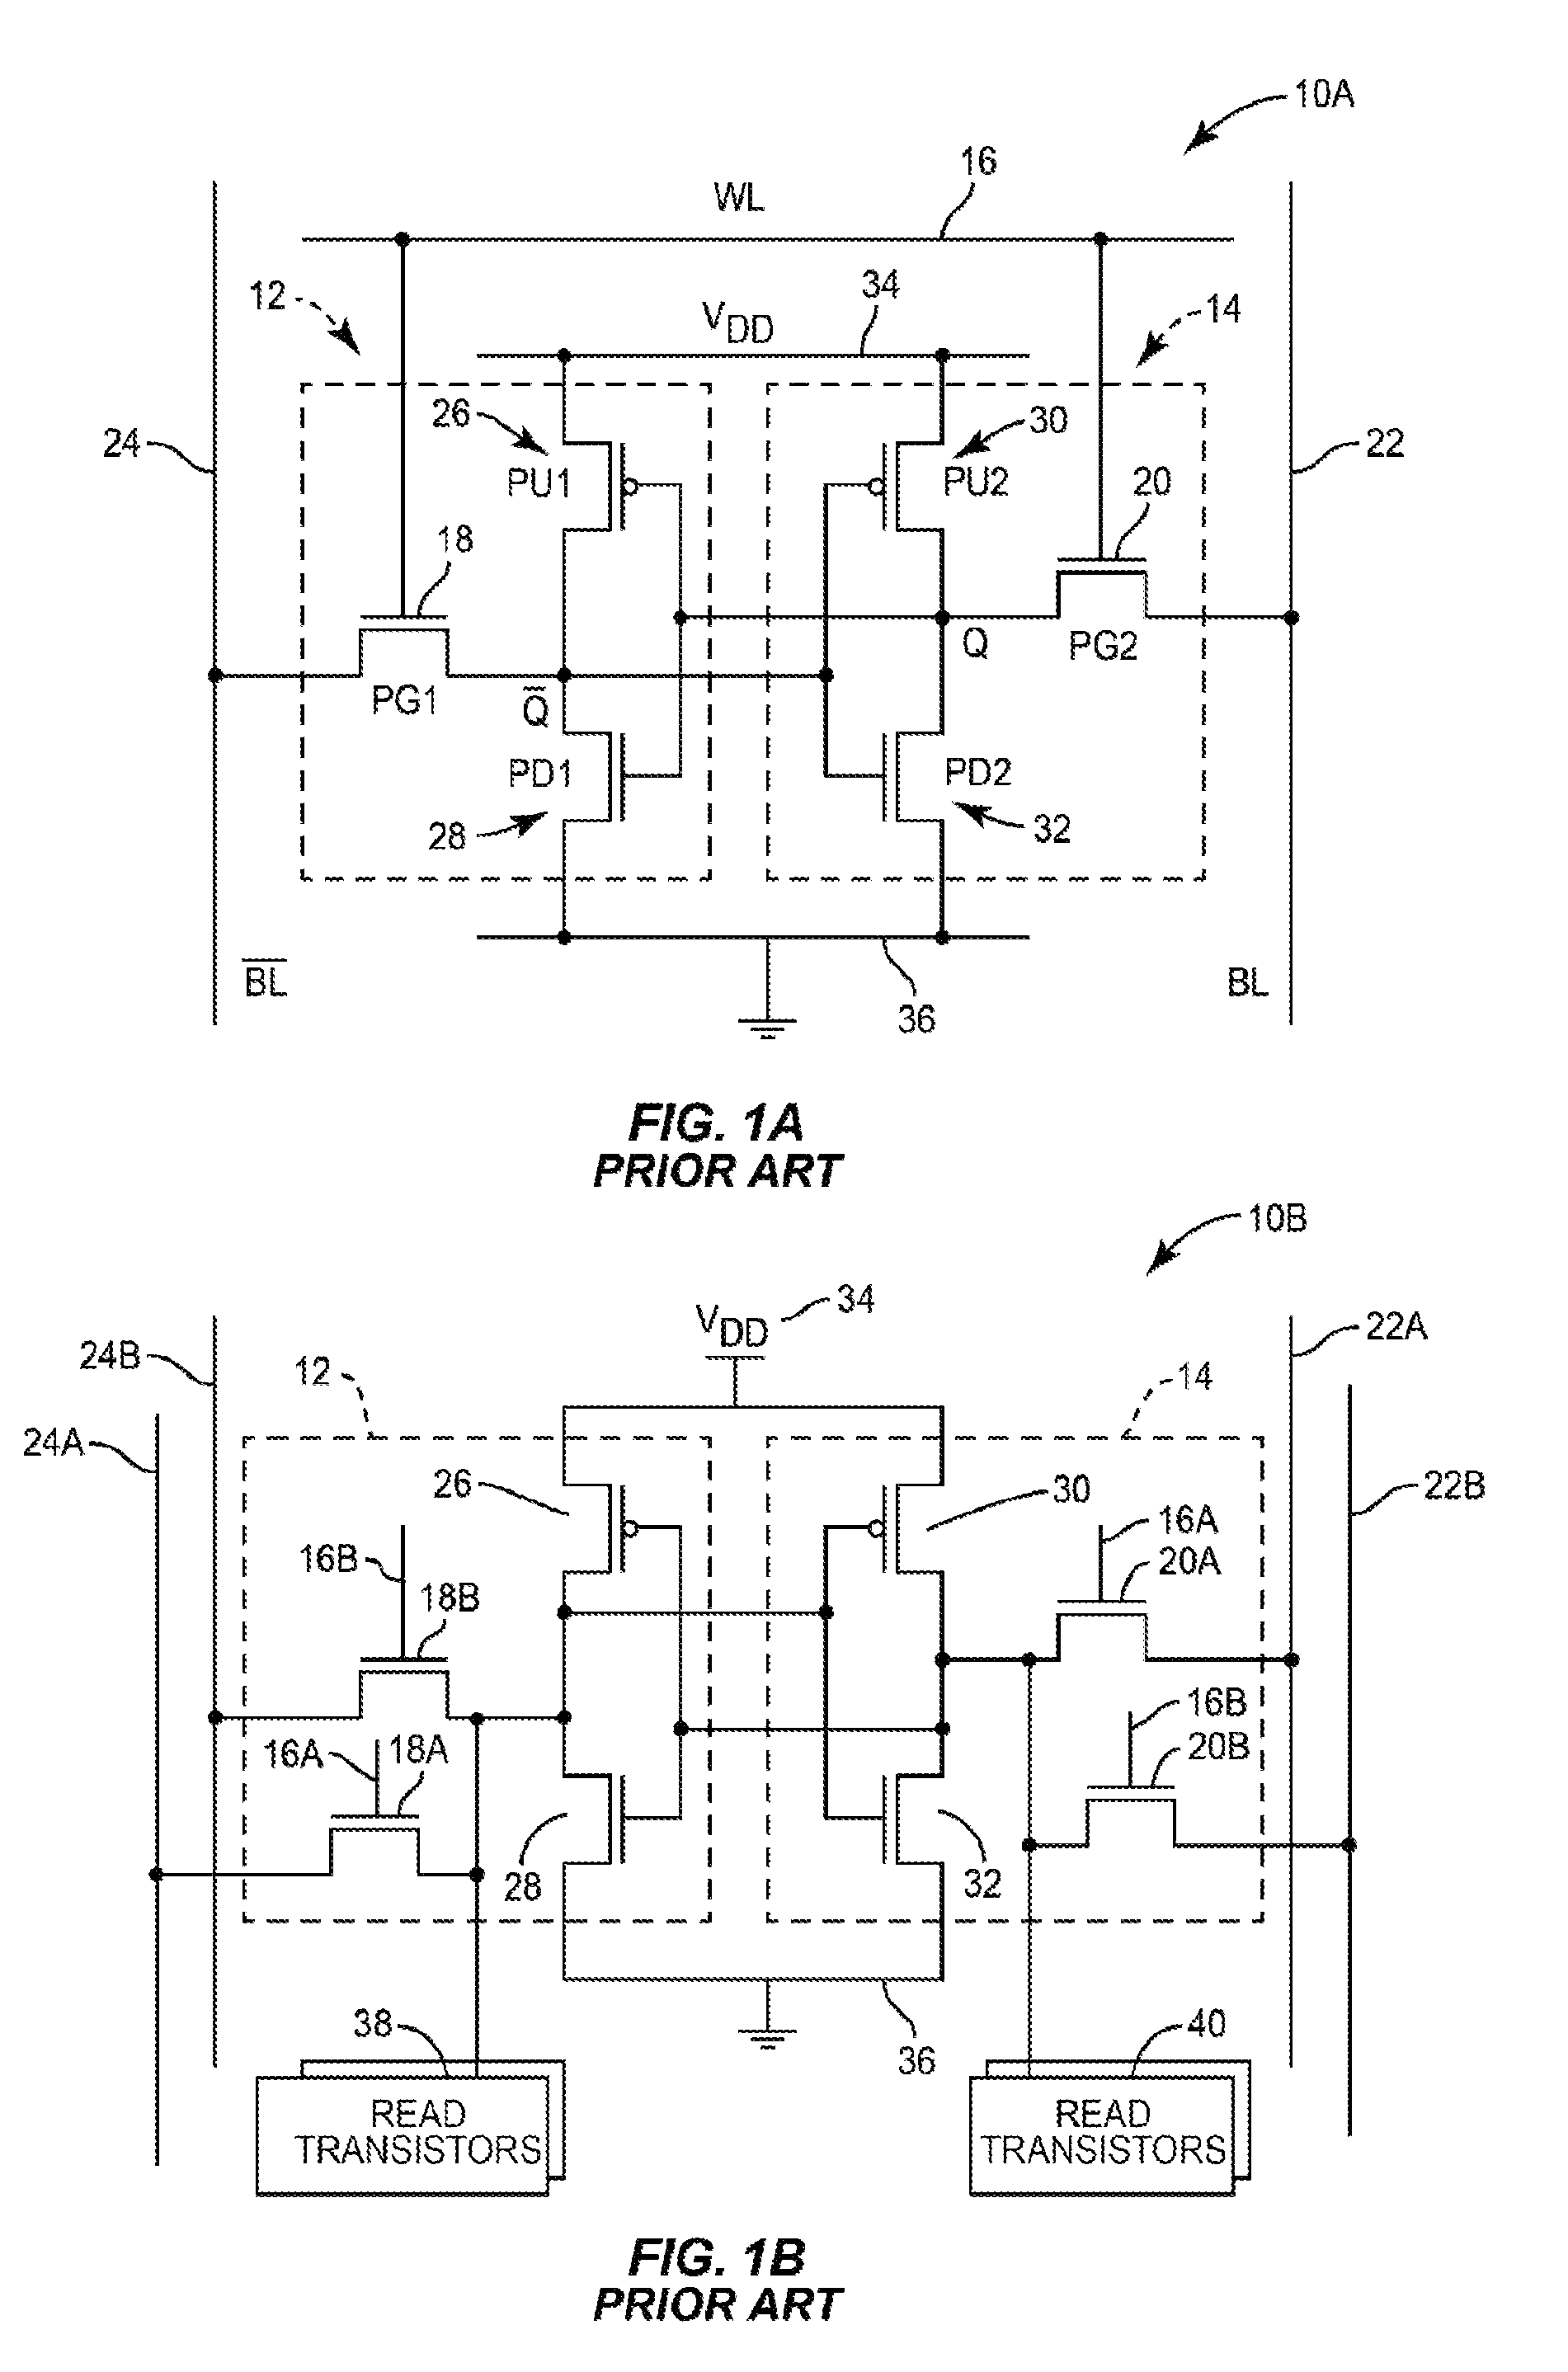 Three-dimensional (3D) memory cell separation among 3D integrated circuit (IC) tiers, and related 3D integrated circuits (3DICS), 3Dic processor cores, and methods